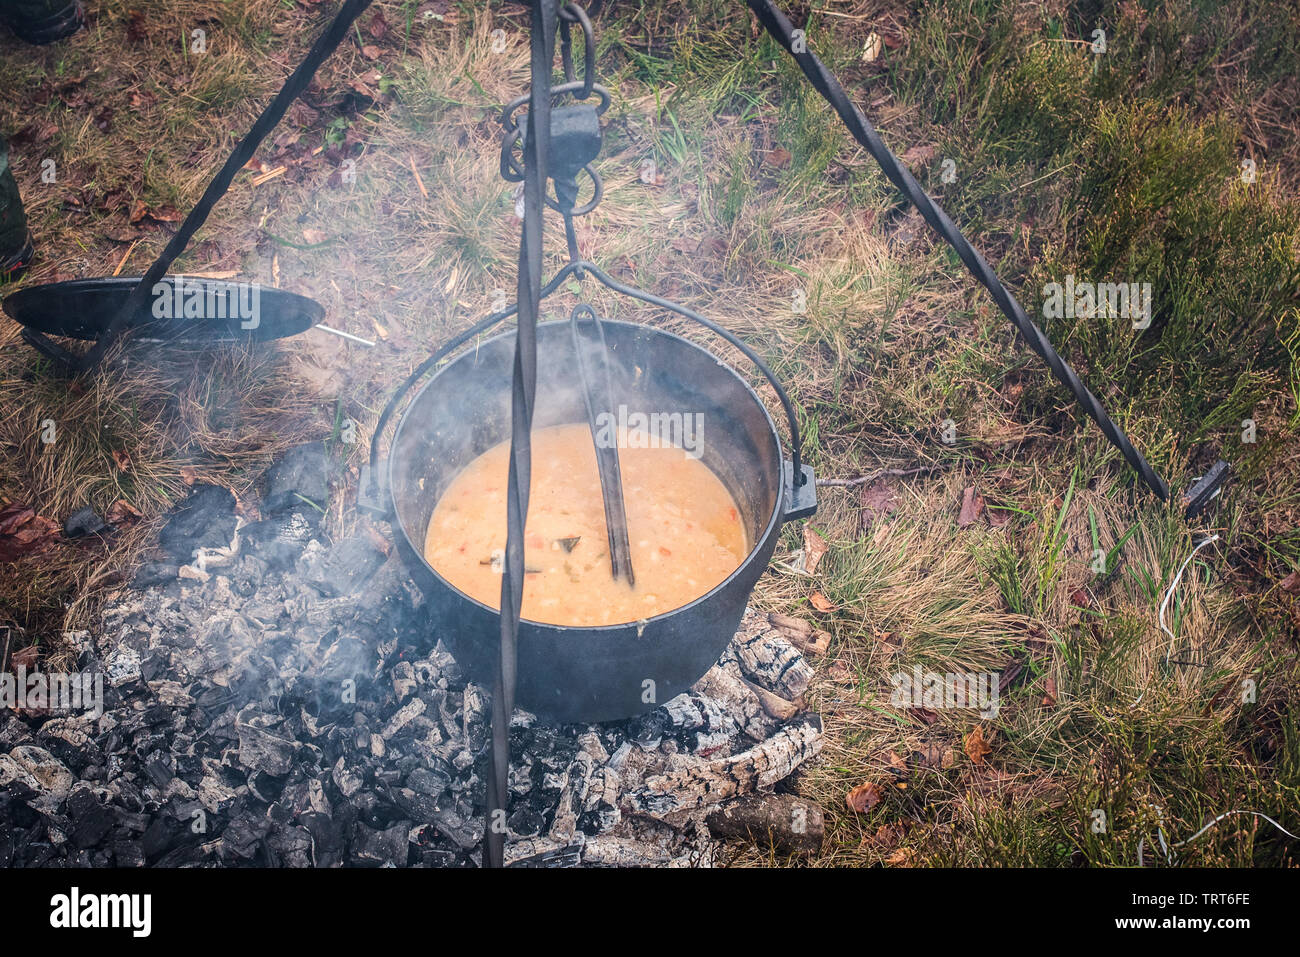 Trail horse riding in Bosnian mountains. Grilled fish, coffee, beans on the fire are prepared in nature ambient. Stock Photo